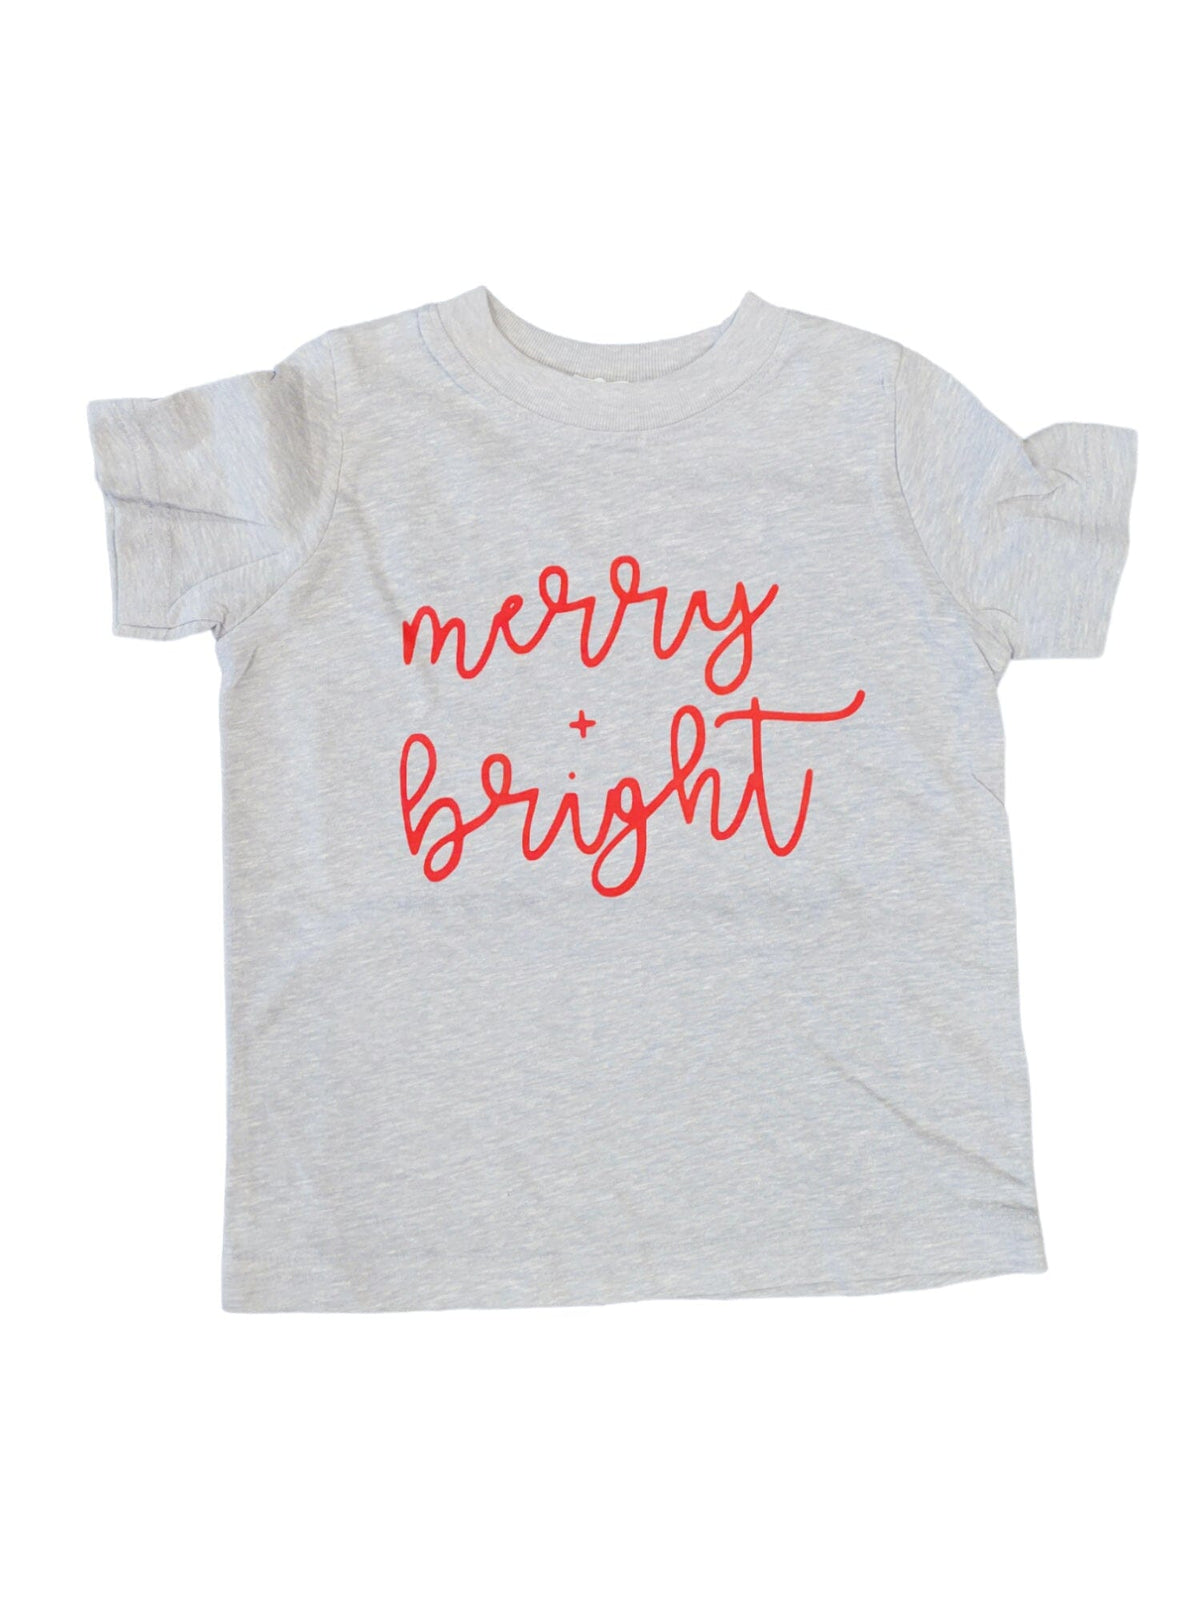 Merry and Bright Child Top